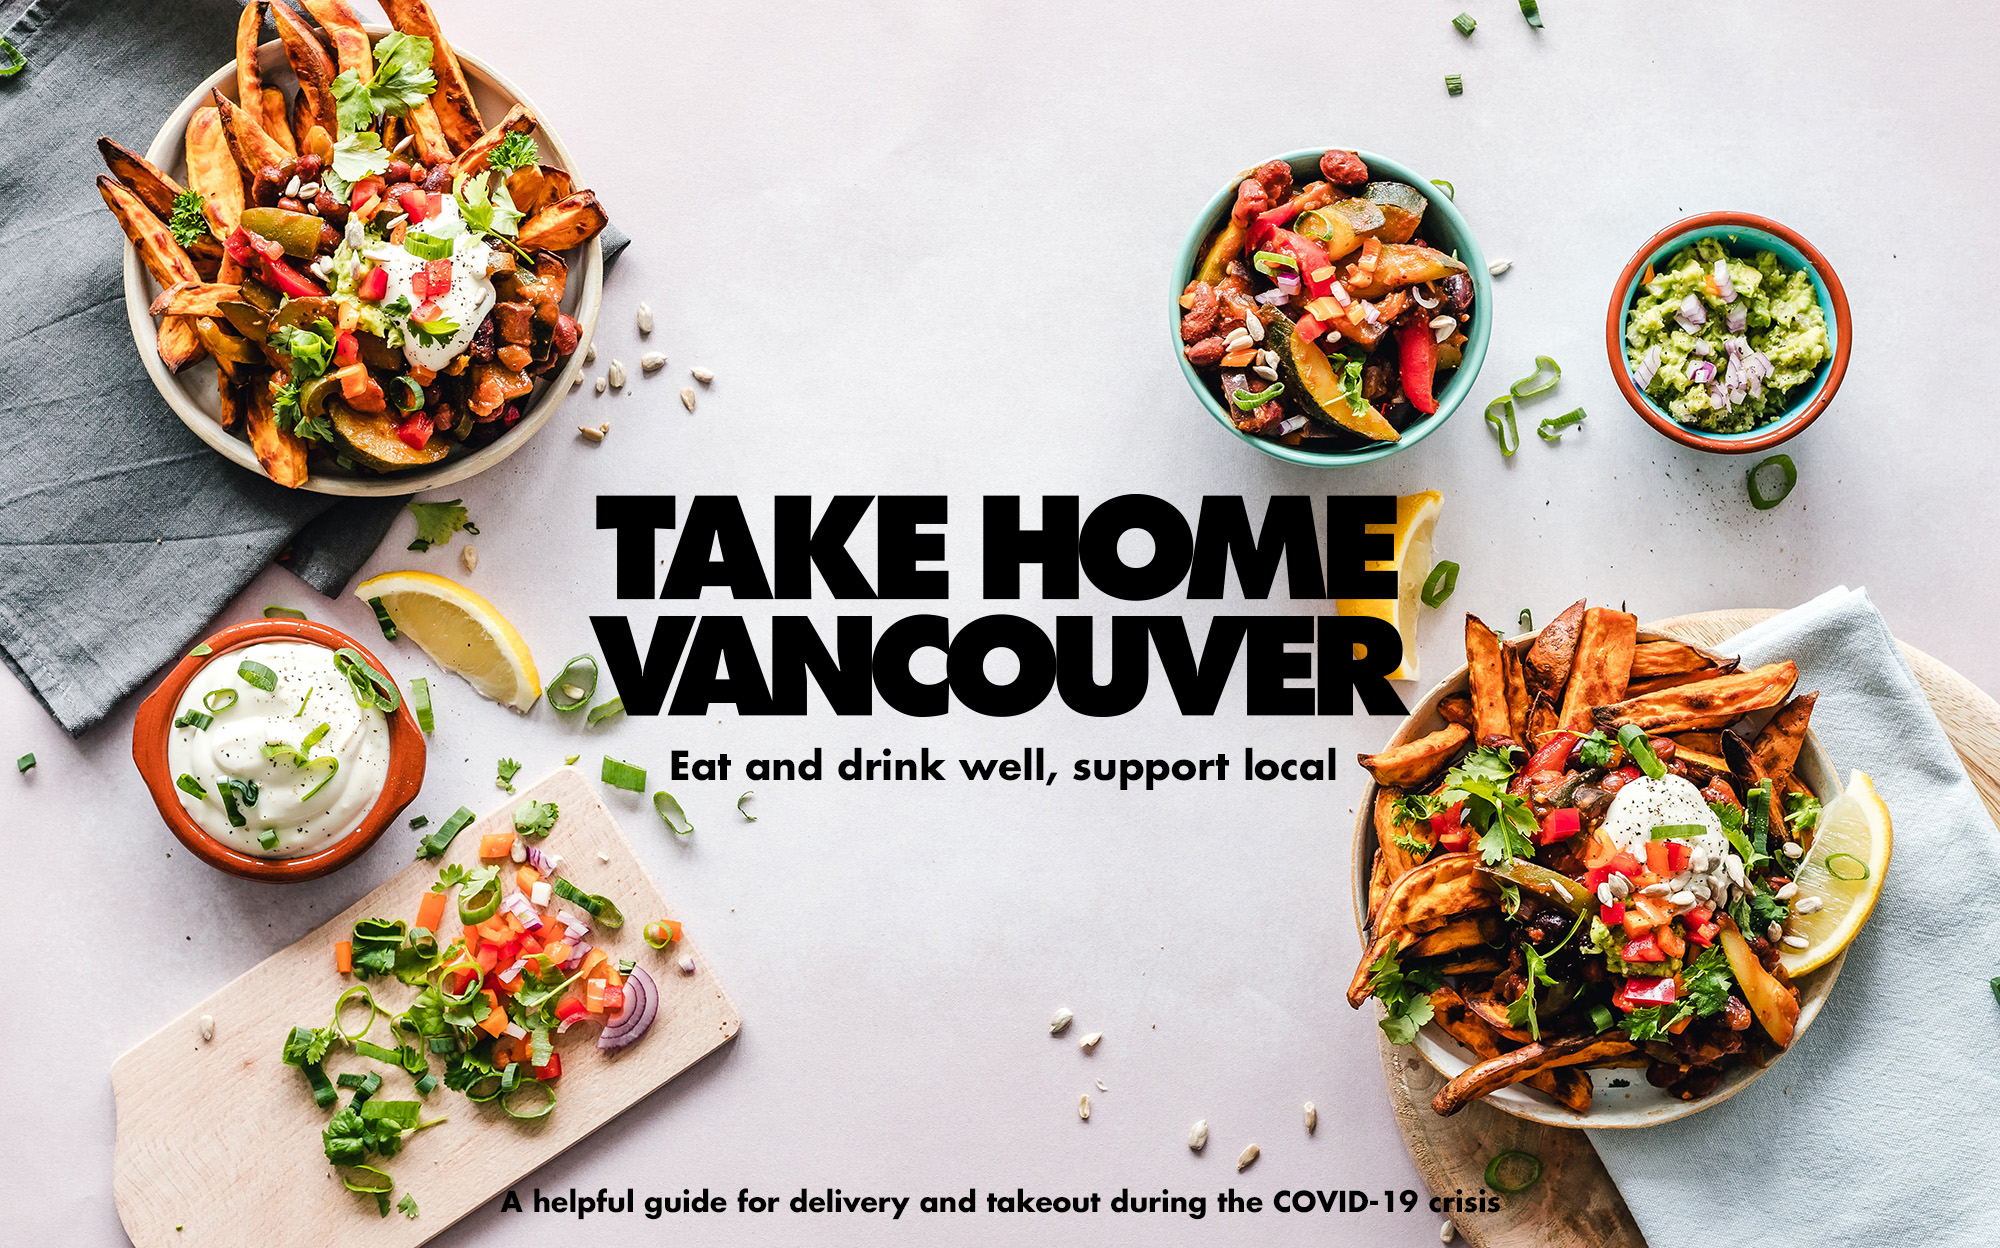 Take Home Vancouver Vancouver Is Awesome